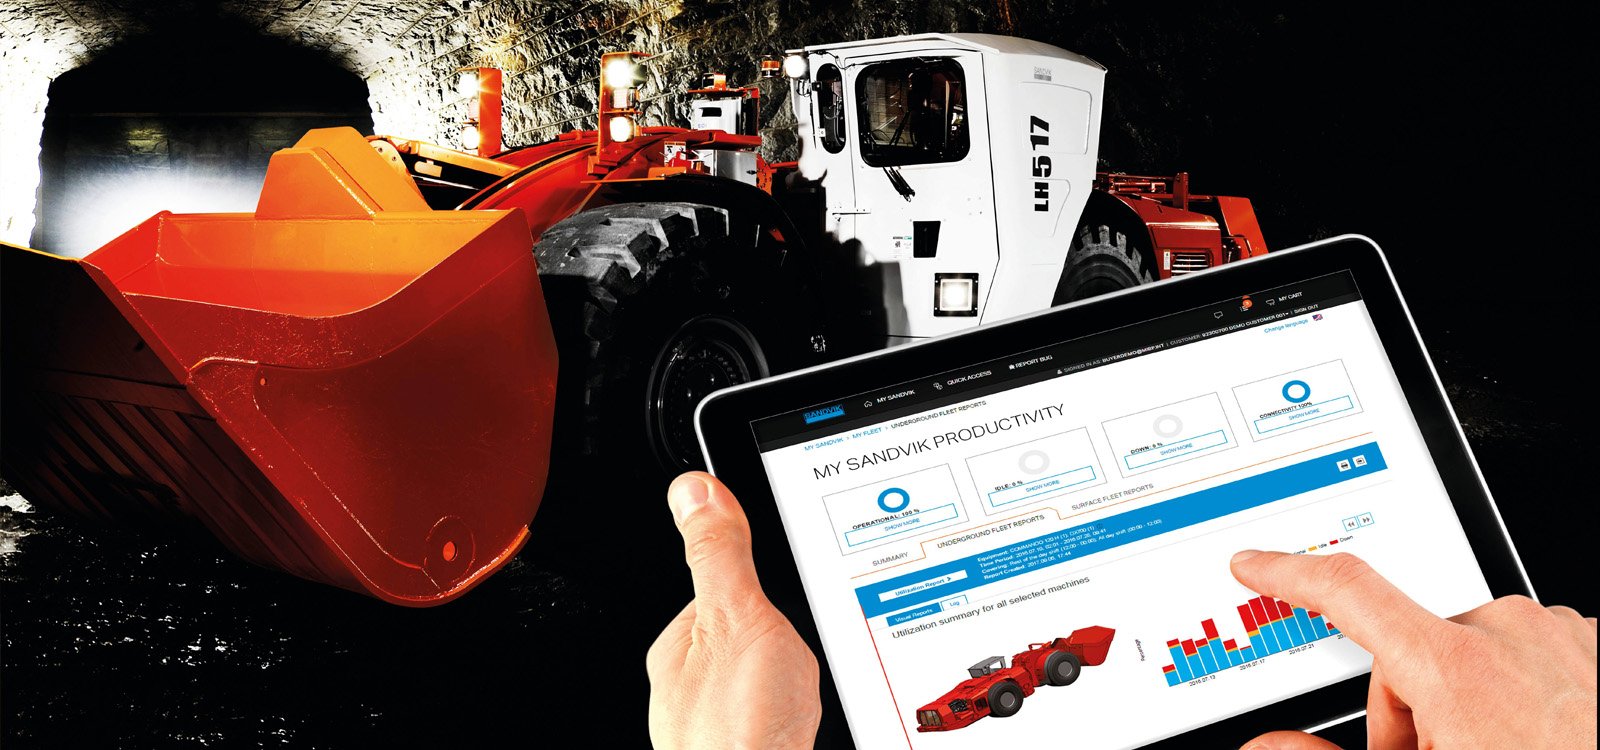 <p>Sandvik has introduced the My Sandvik digital service solutions to help with productivity and provide useful insights into making operations more efficient.</p>
